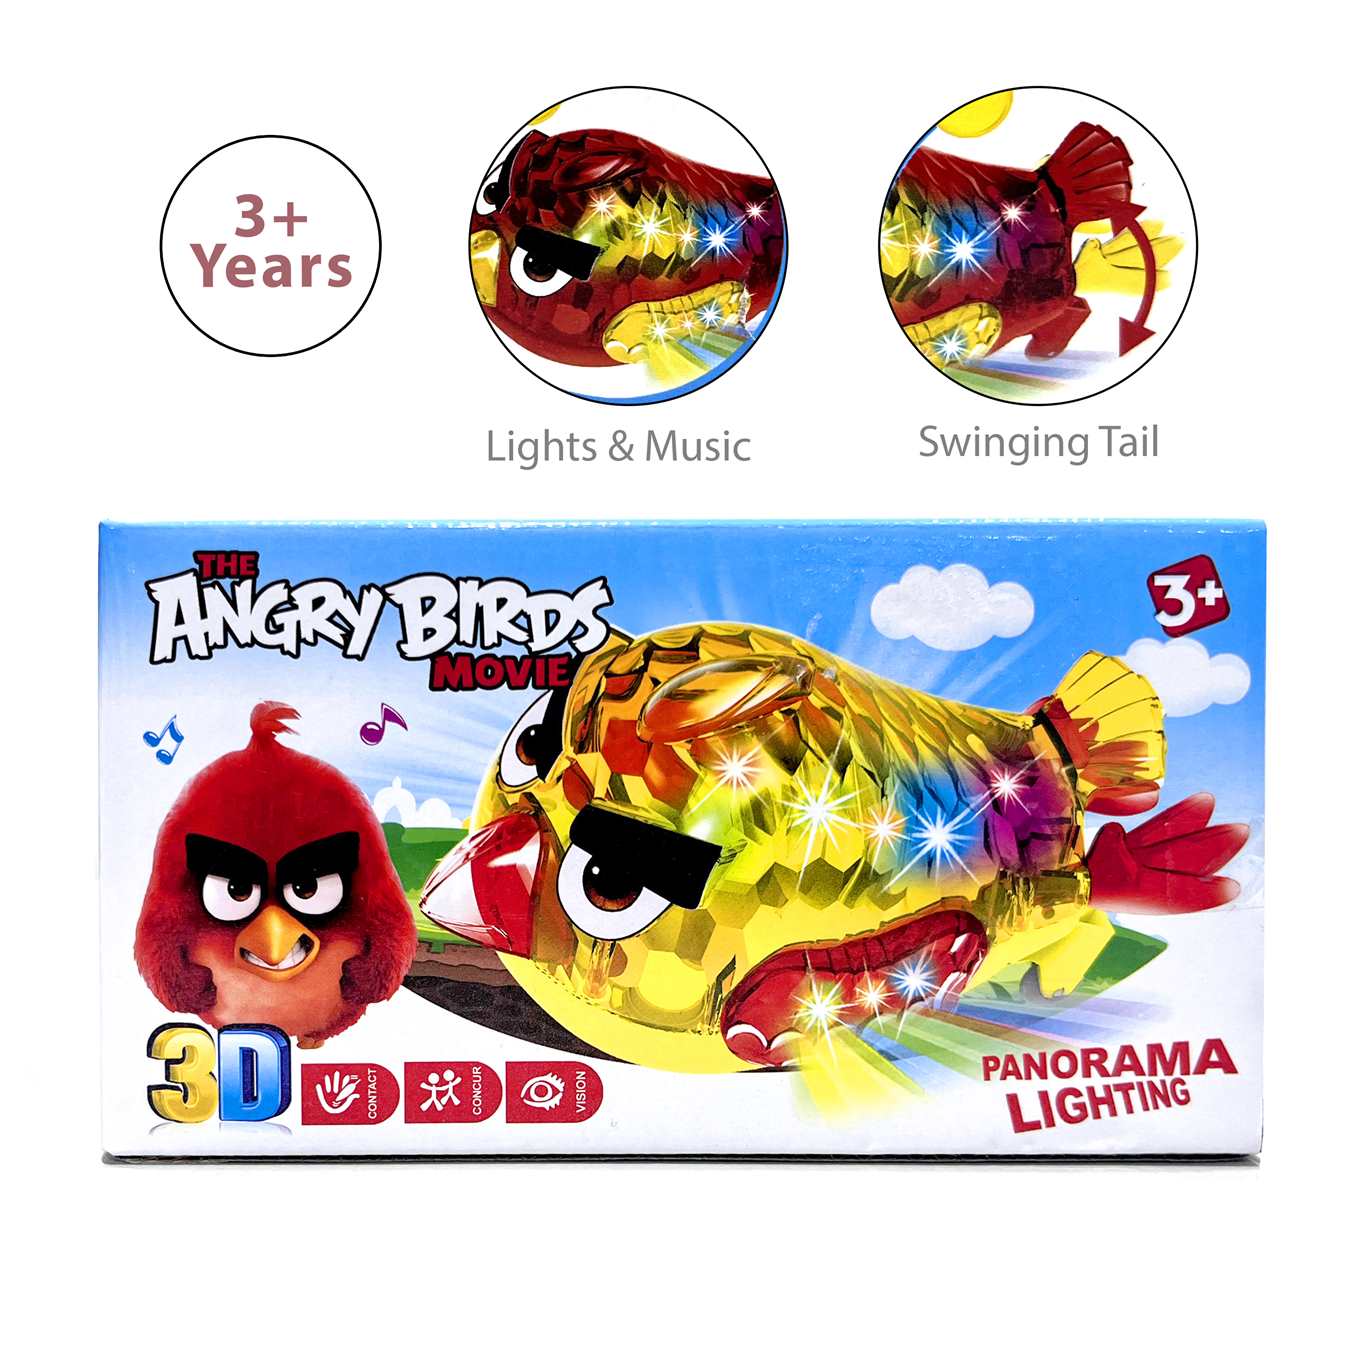 Buy Angry Birds Battery Operated Toy With Lights & Music Online in India